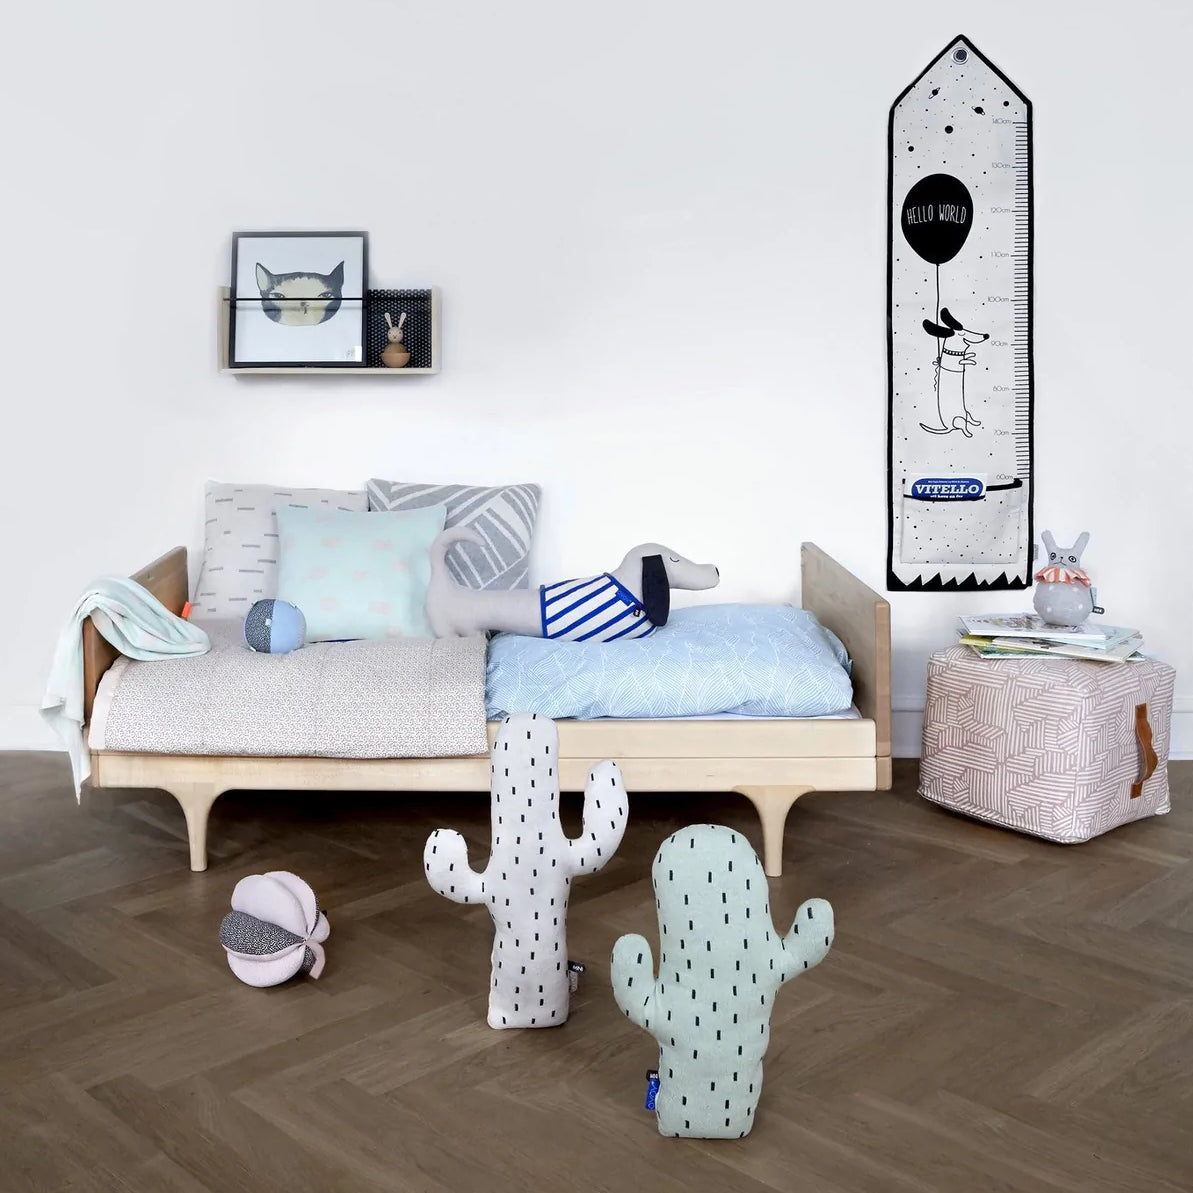 the quirky cactus cushions by OYOY take centre stage in this Scandinavian inspired childrens room setting